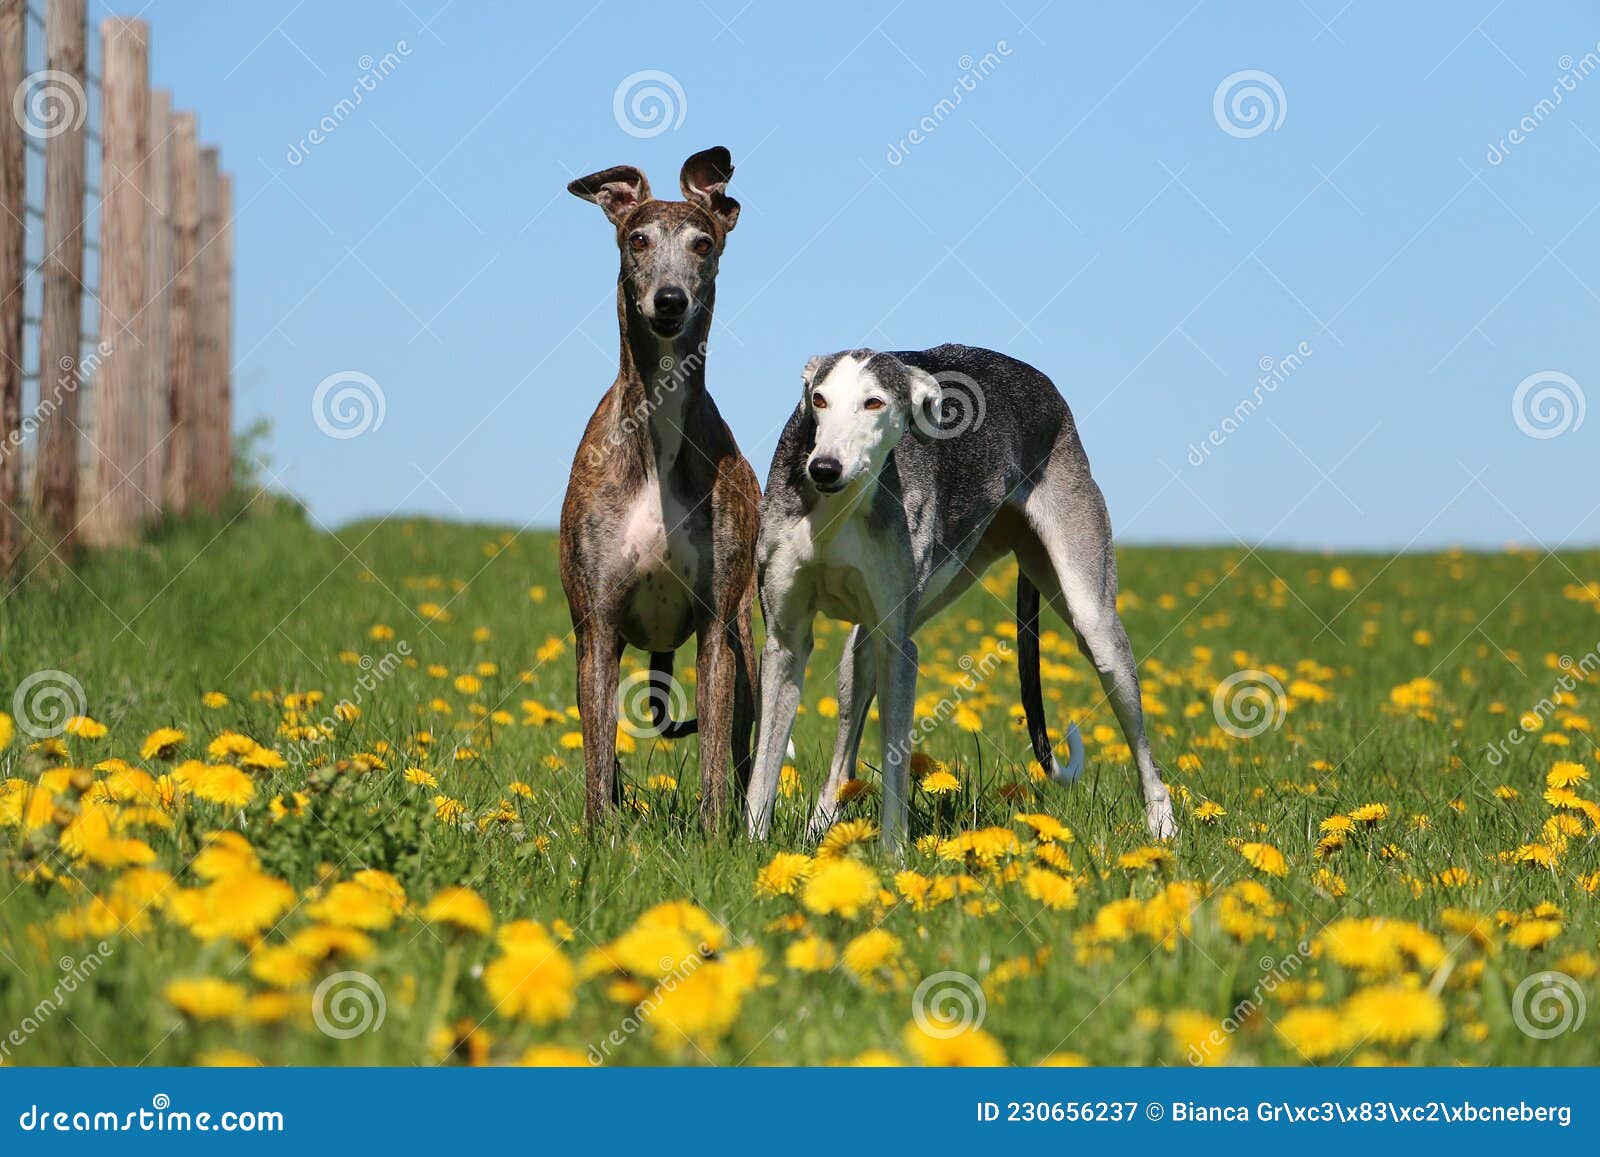 two beautiful galgos are standing in a field with yellow dandelions in the garden